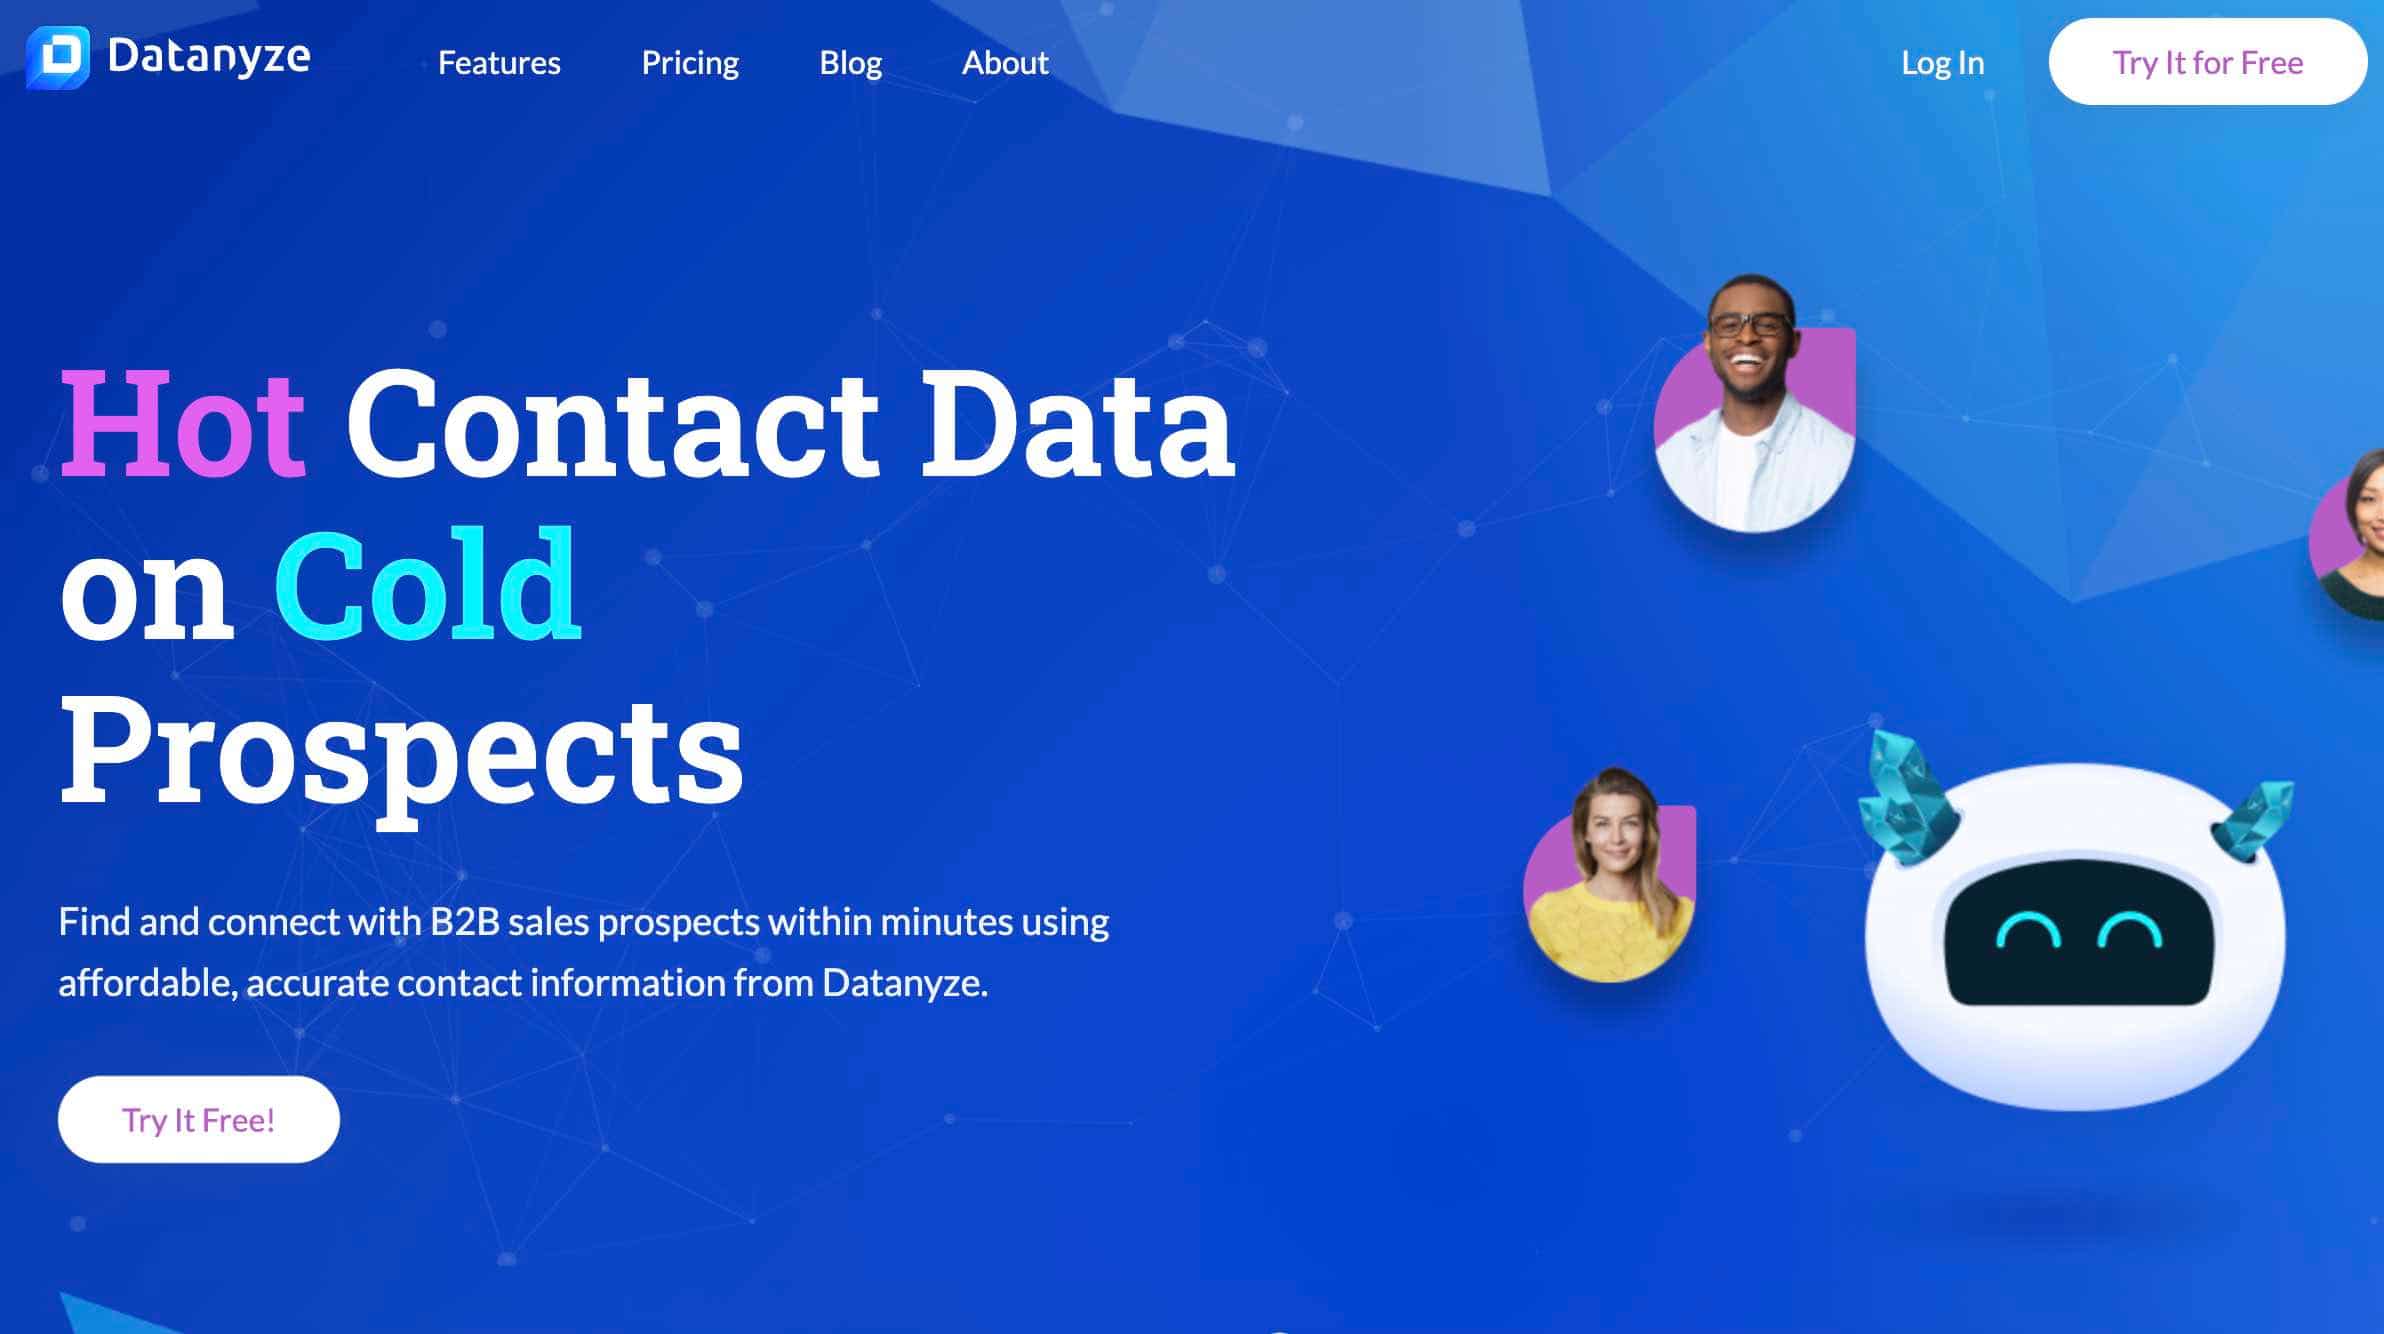 data enrichment, Datanyze integrates with a variety of CRMs and provides data on millions of companies worldwide.